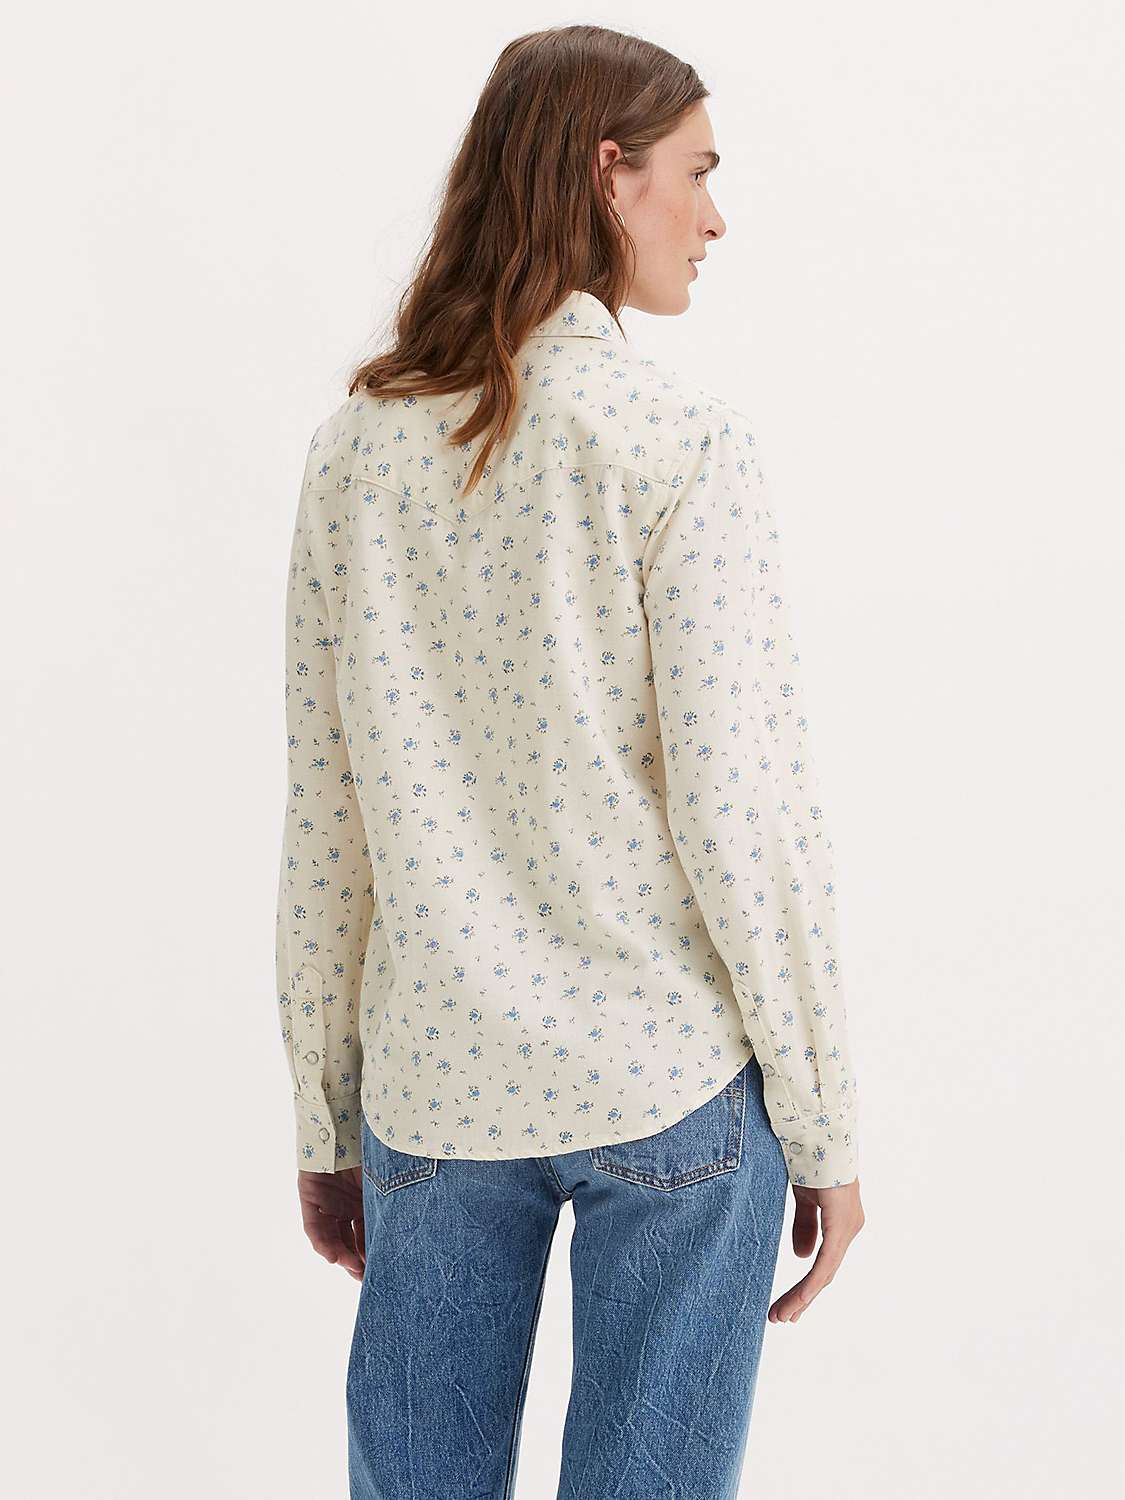 Buy Levi's Iconic Western Dolly Floral Shirt, Sun Cream Online at johnlewis.com